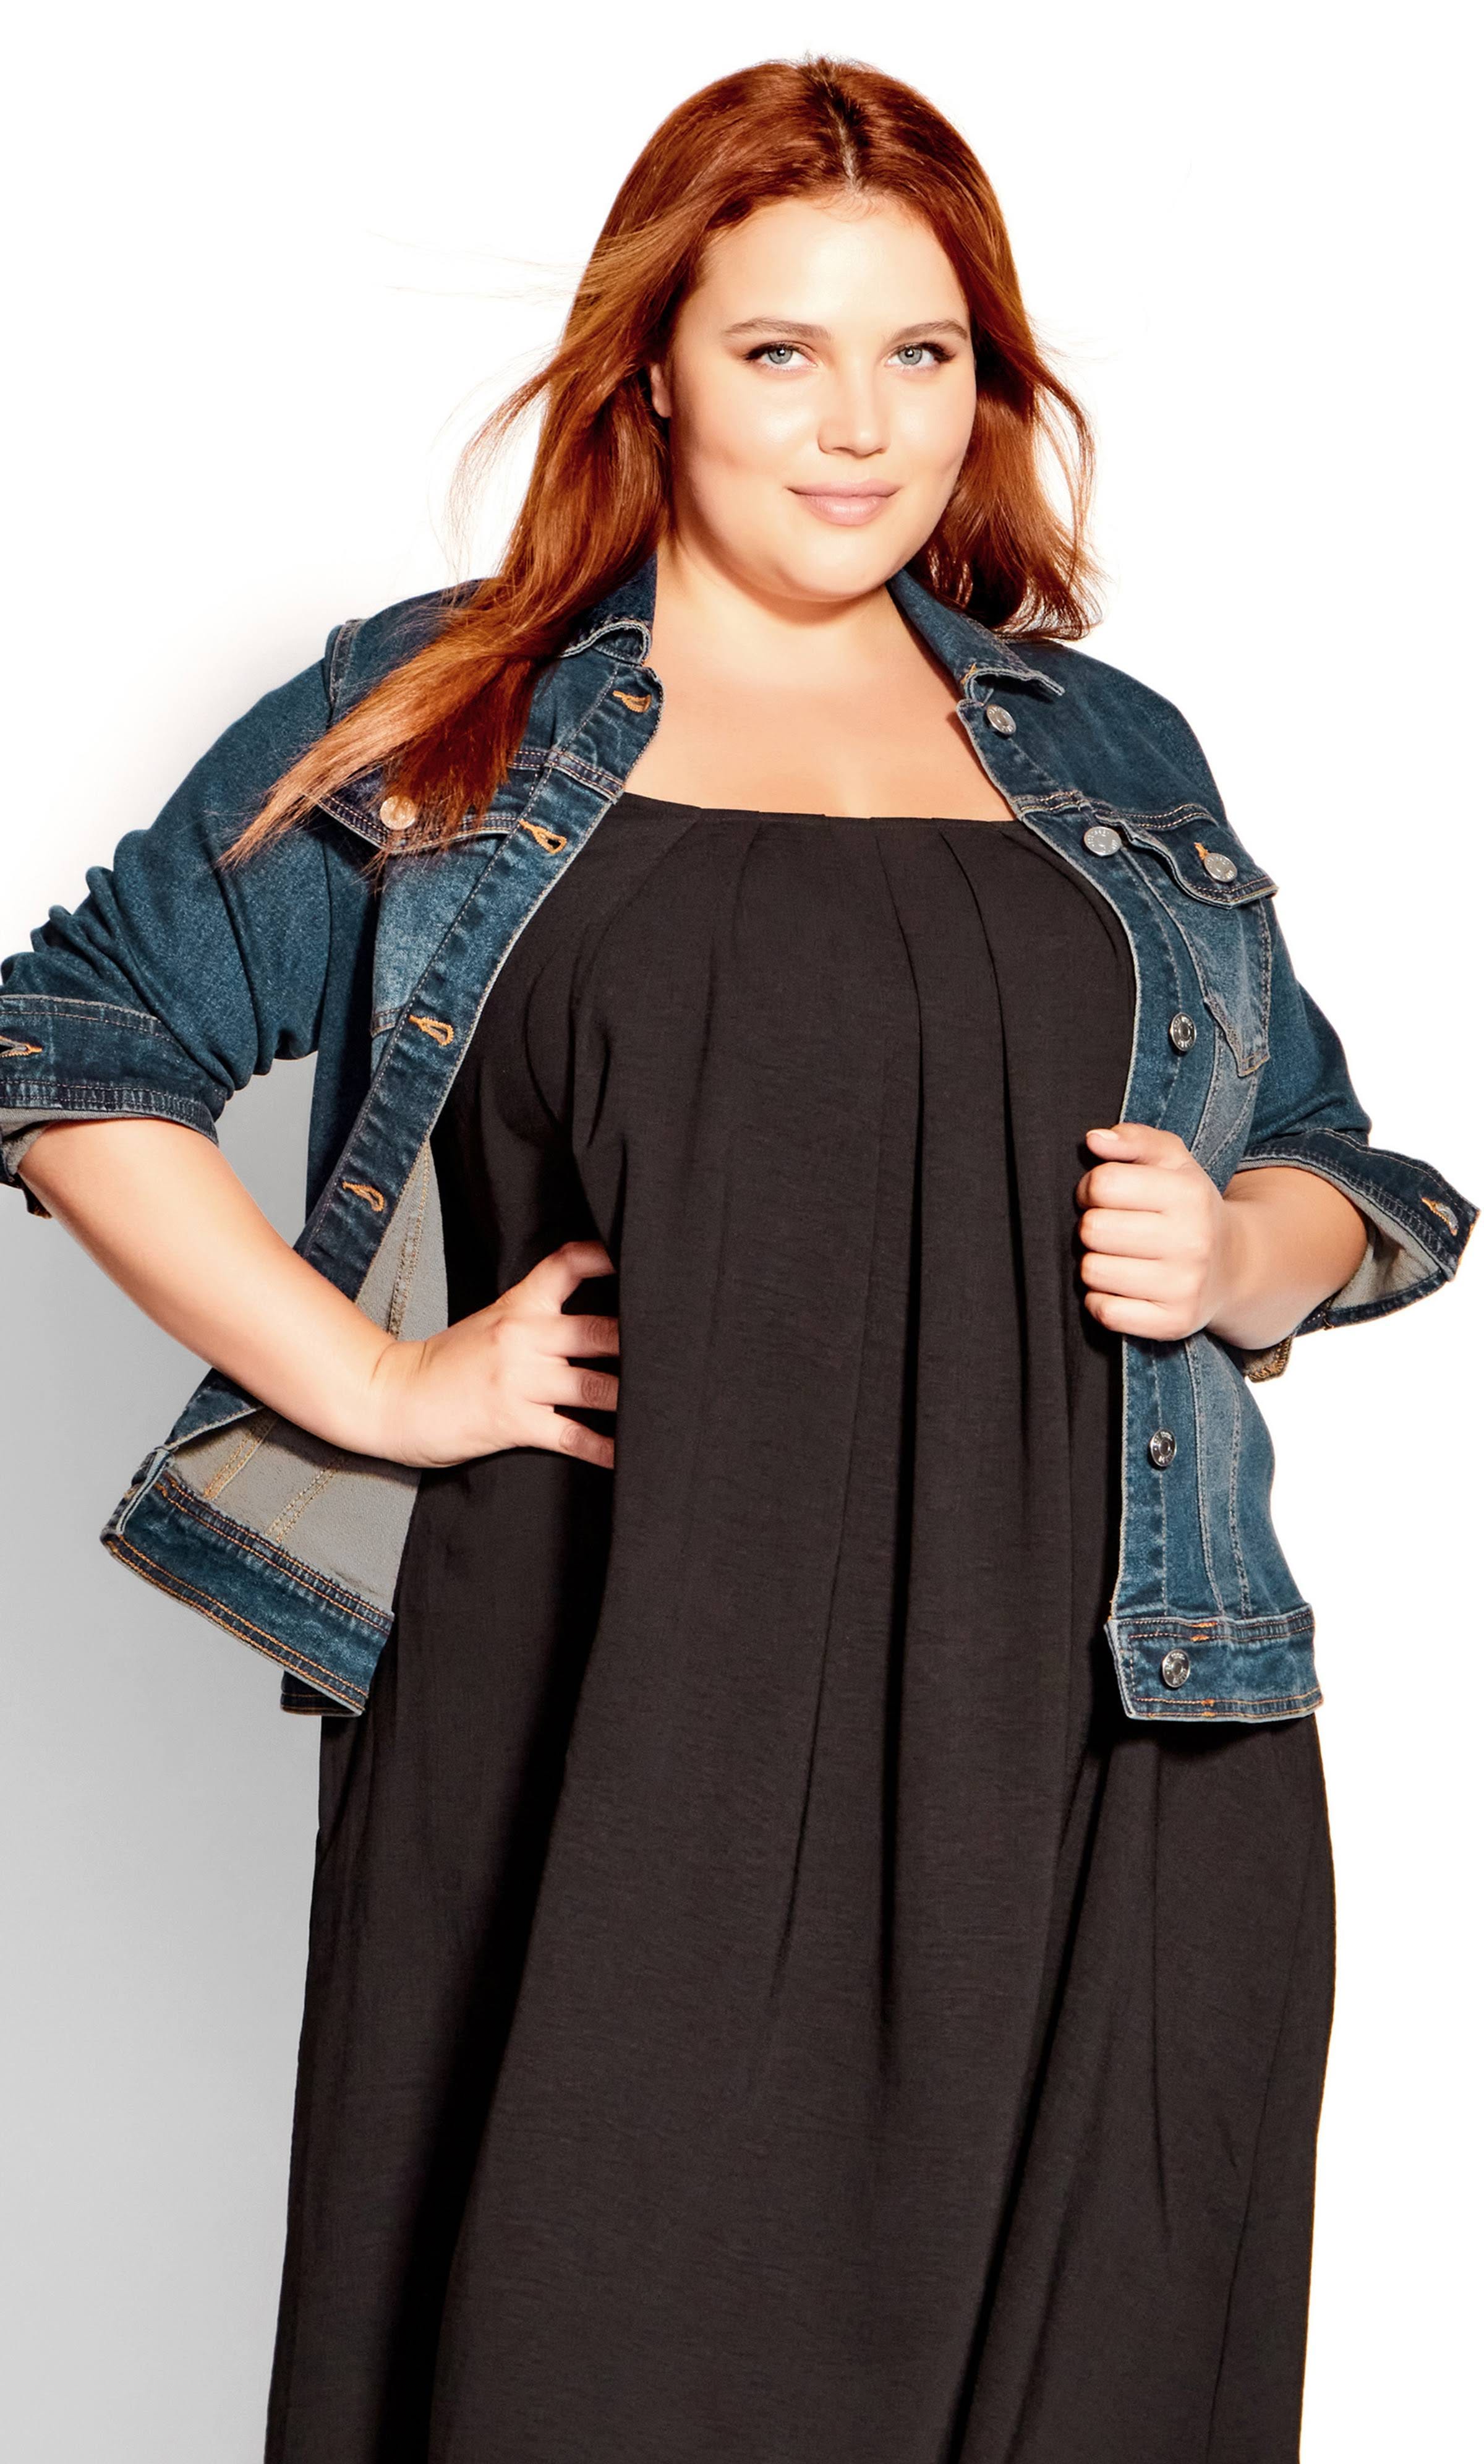 Attractive Stretch Denim Jacket for Women's Plus Sizes | Image